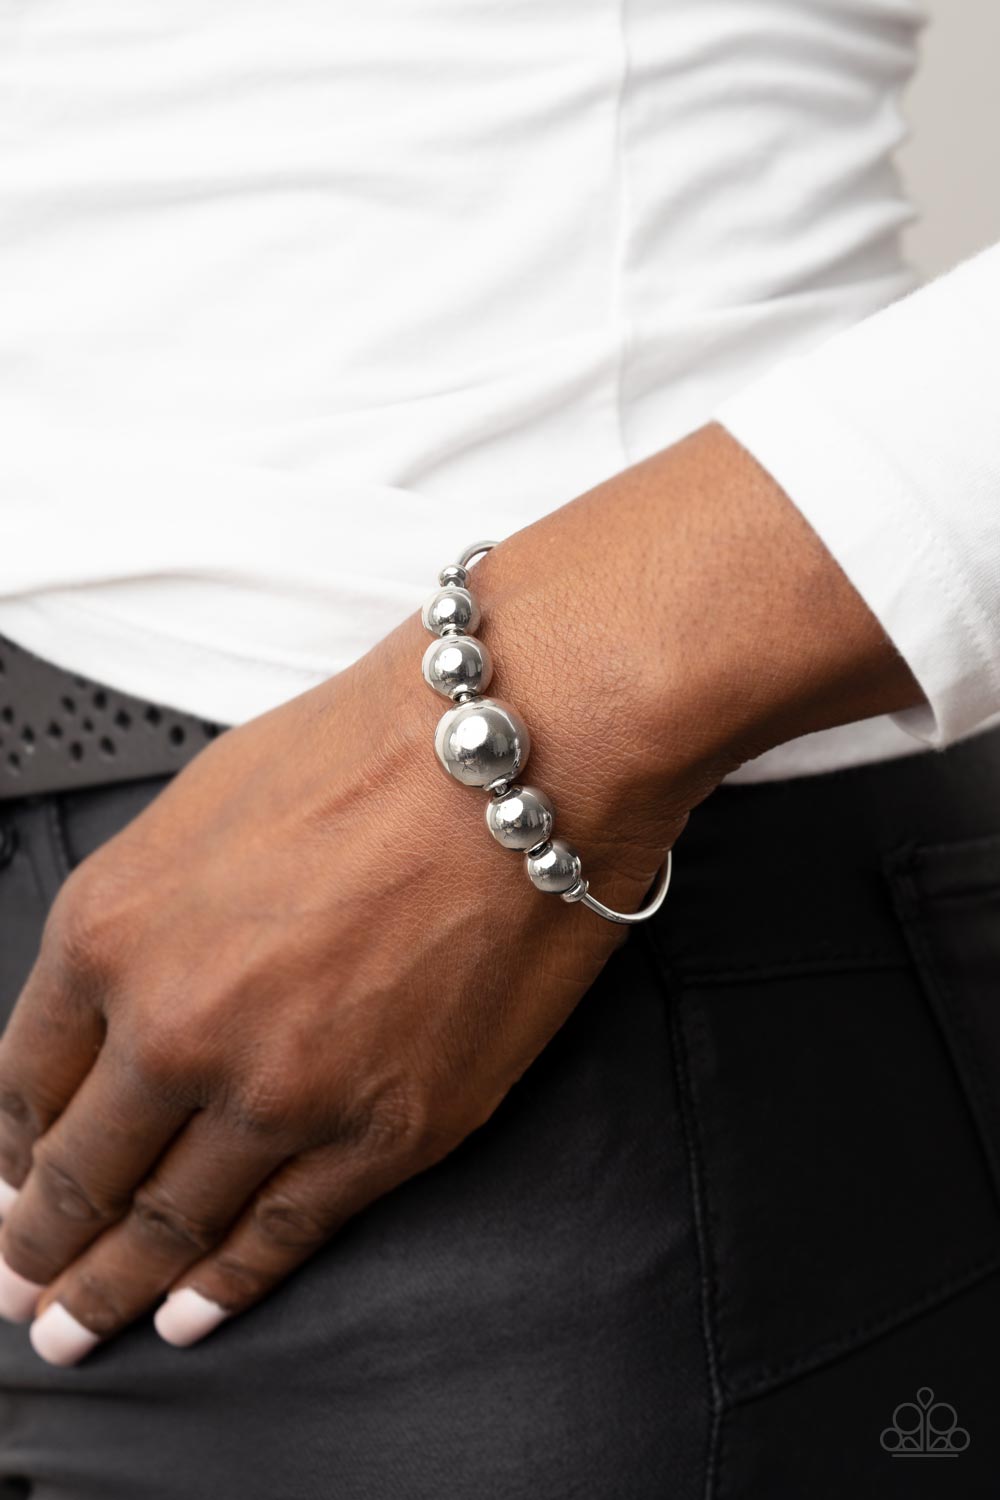 Bead Creed - Shiny Silver Cuff Bracelet - Paparazzi Accessories - Oversized collection of shiny silver beads are threaded along a dainty silver cuff for a dramatic industrial stylish fashion bracelet.